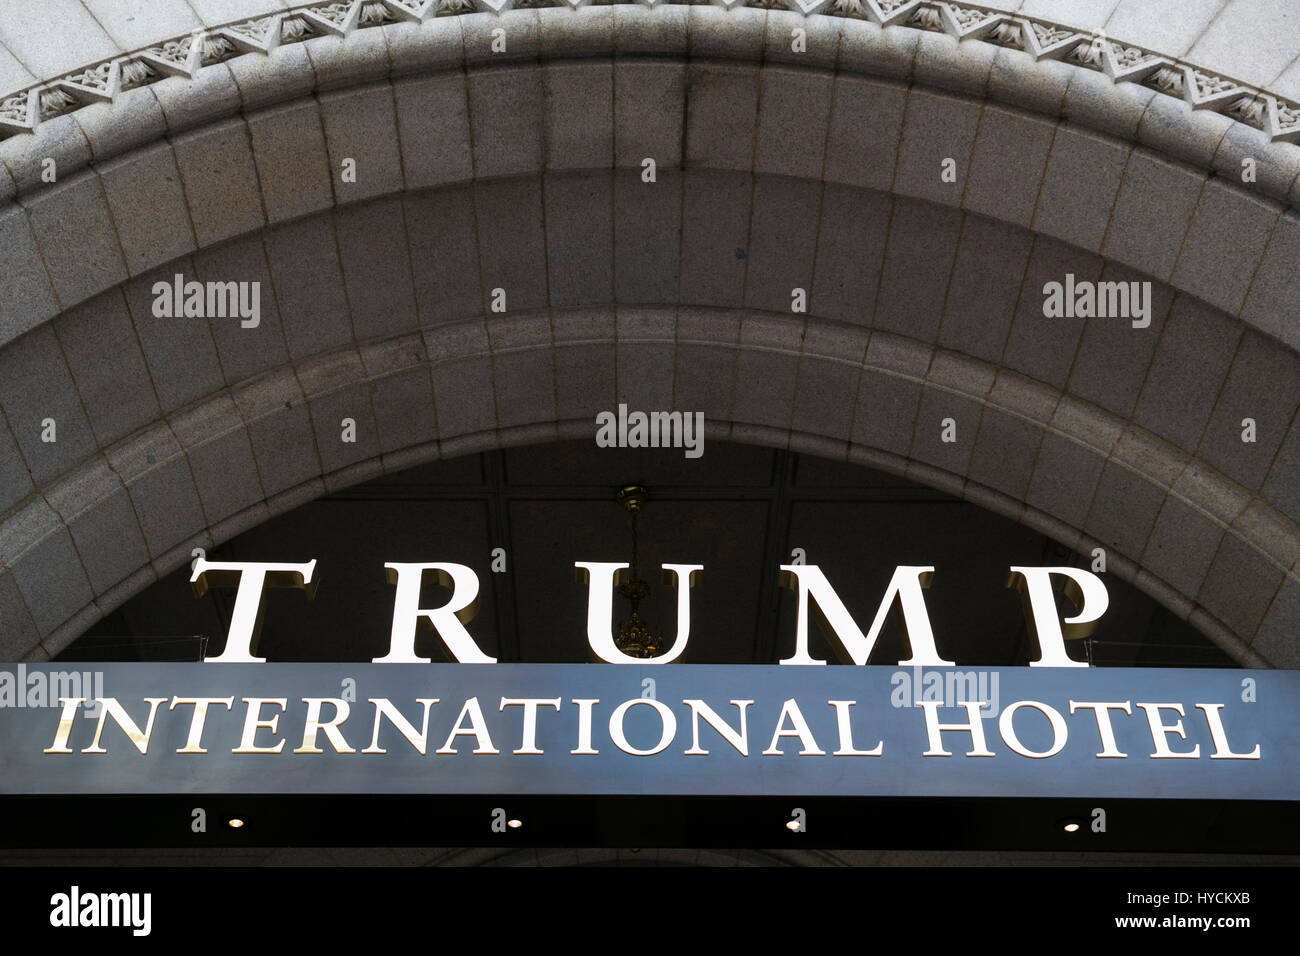 A logo sign outside of the Trump International Hotel in the Old Post Office building in downtown Washington, D.C., on April 2, 2017. Stock Photo